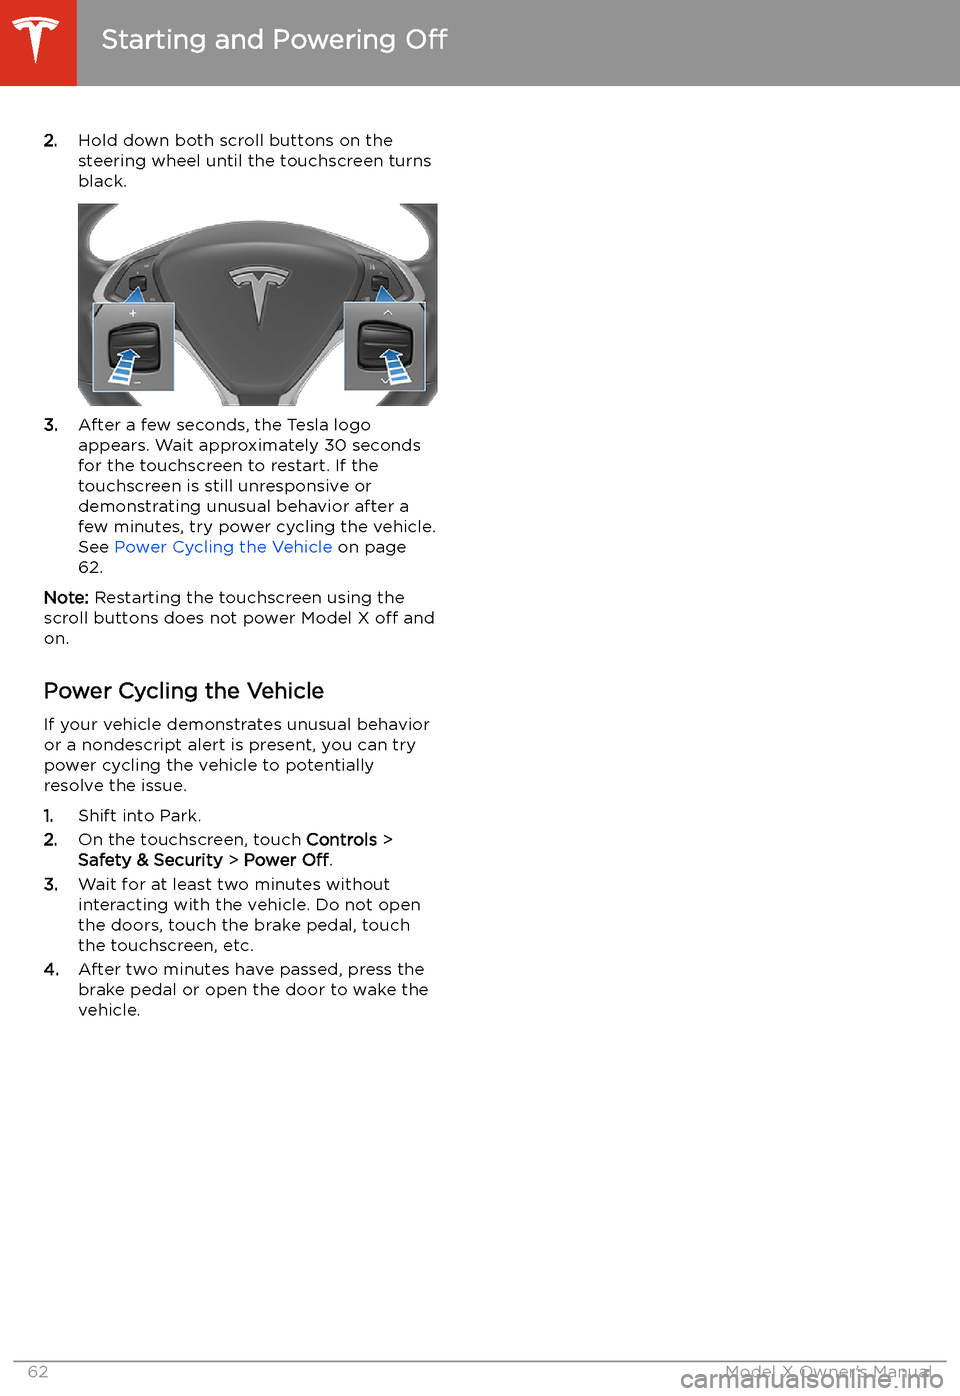 TESLA MODEL X 2020  Owners Manual 2.Hold down both scroll buttons on the
steering wheel until the touchscreen turns
black.
3. After a few seconds, the Tesla logo
appears. Wait approximately 30 seconds for the touchscreen to restart. I